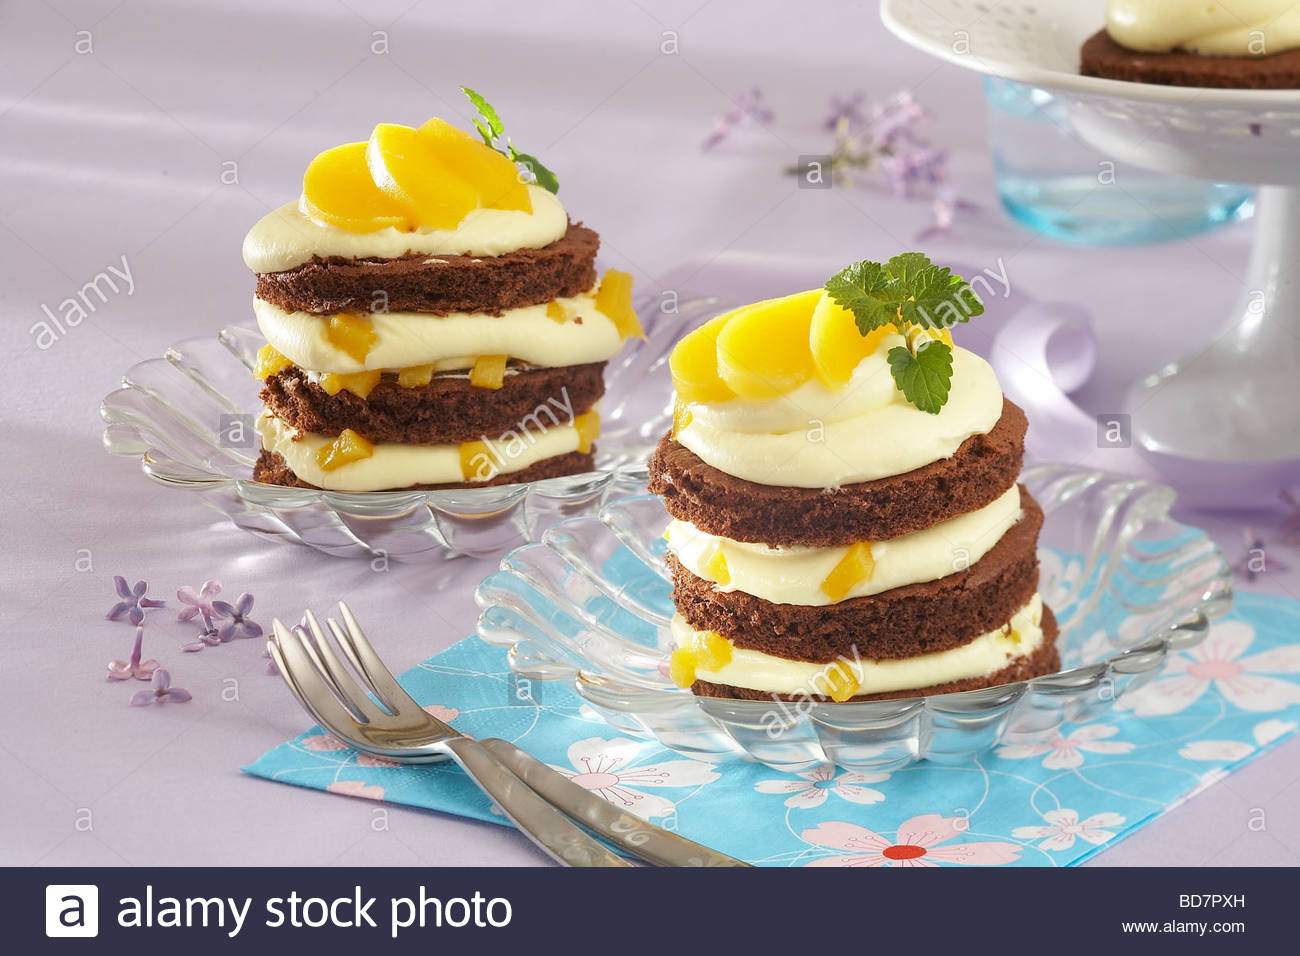 Cocoa Desserts With Peach And Cottage Cheese Stock Photo 25372553